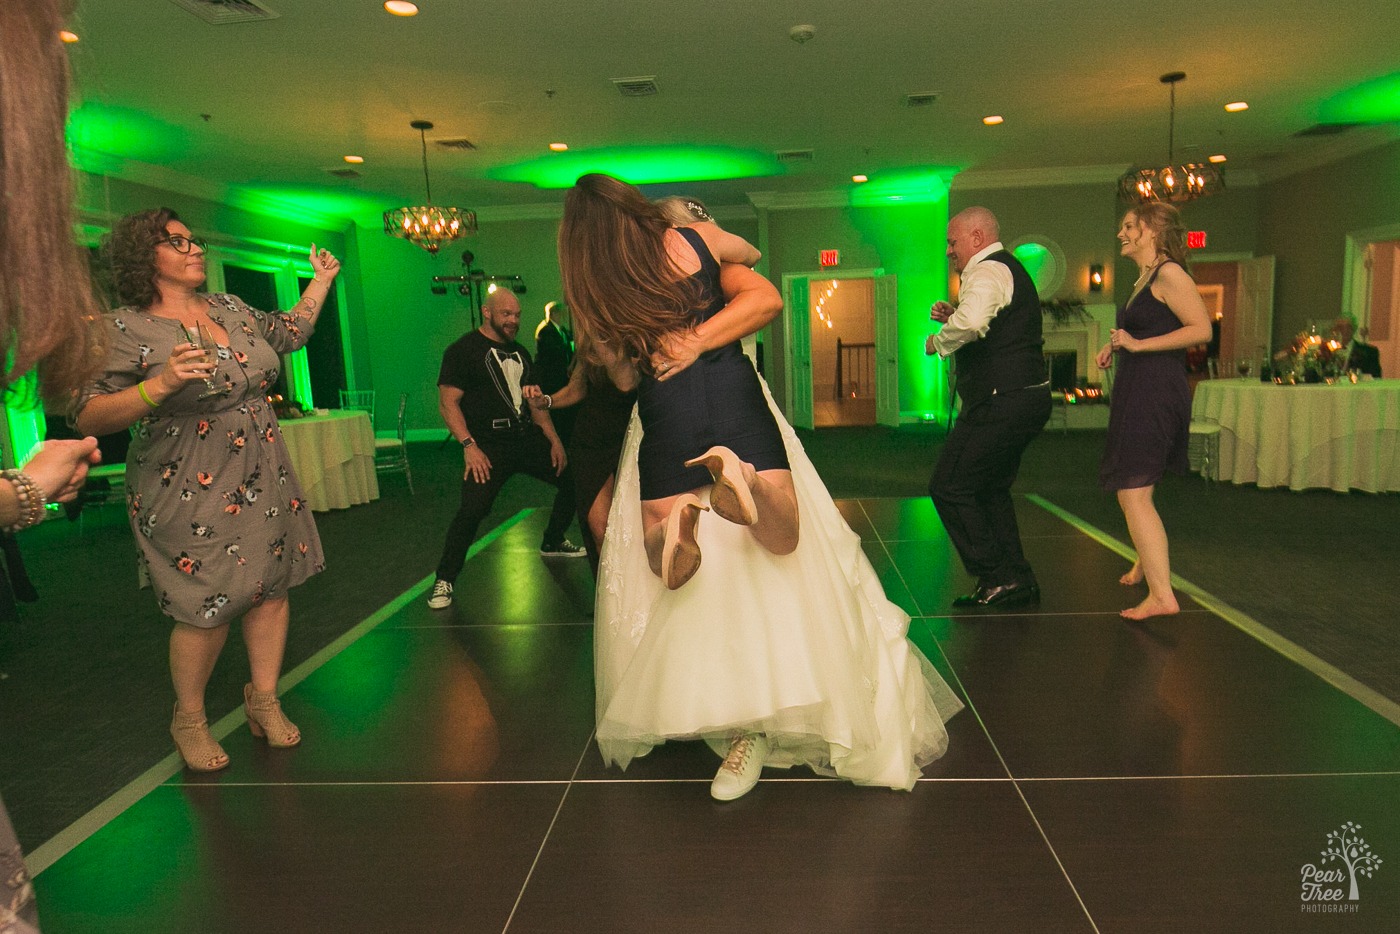 Woman lifted off the dance floor with her feet in the air as the bride spins her